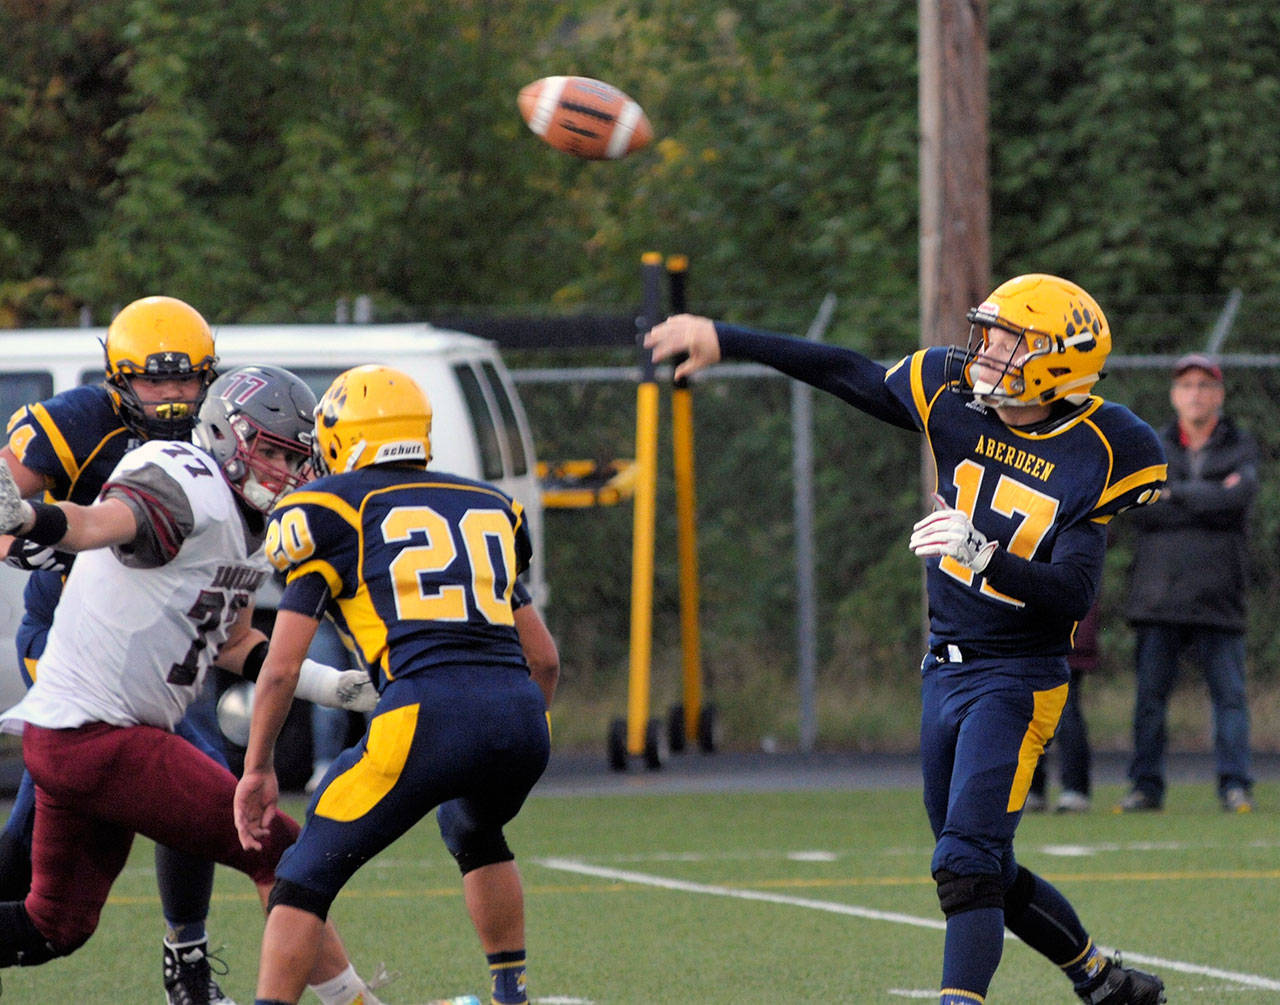 Aberdeen’s Ben Dublanko throws a pass downfield against Hoquiam on Friday. (Hasani Grayson | The Daily World)